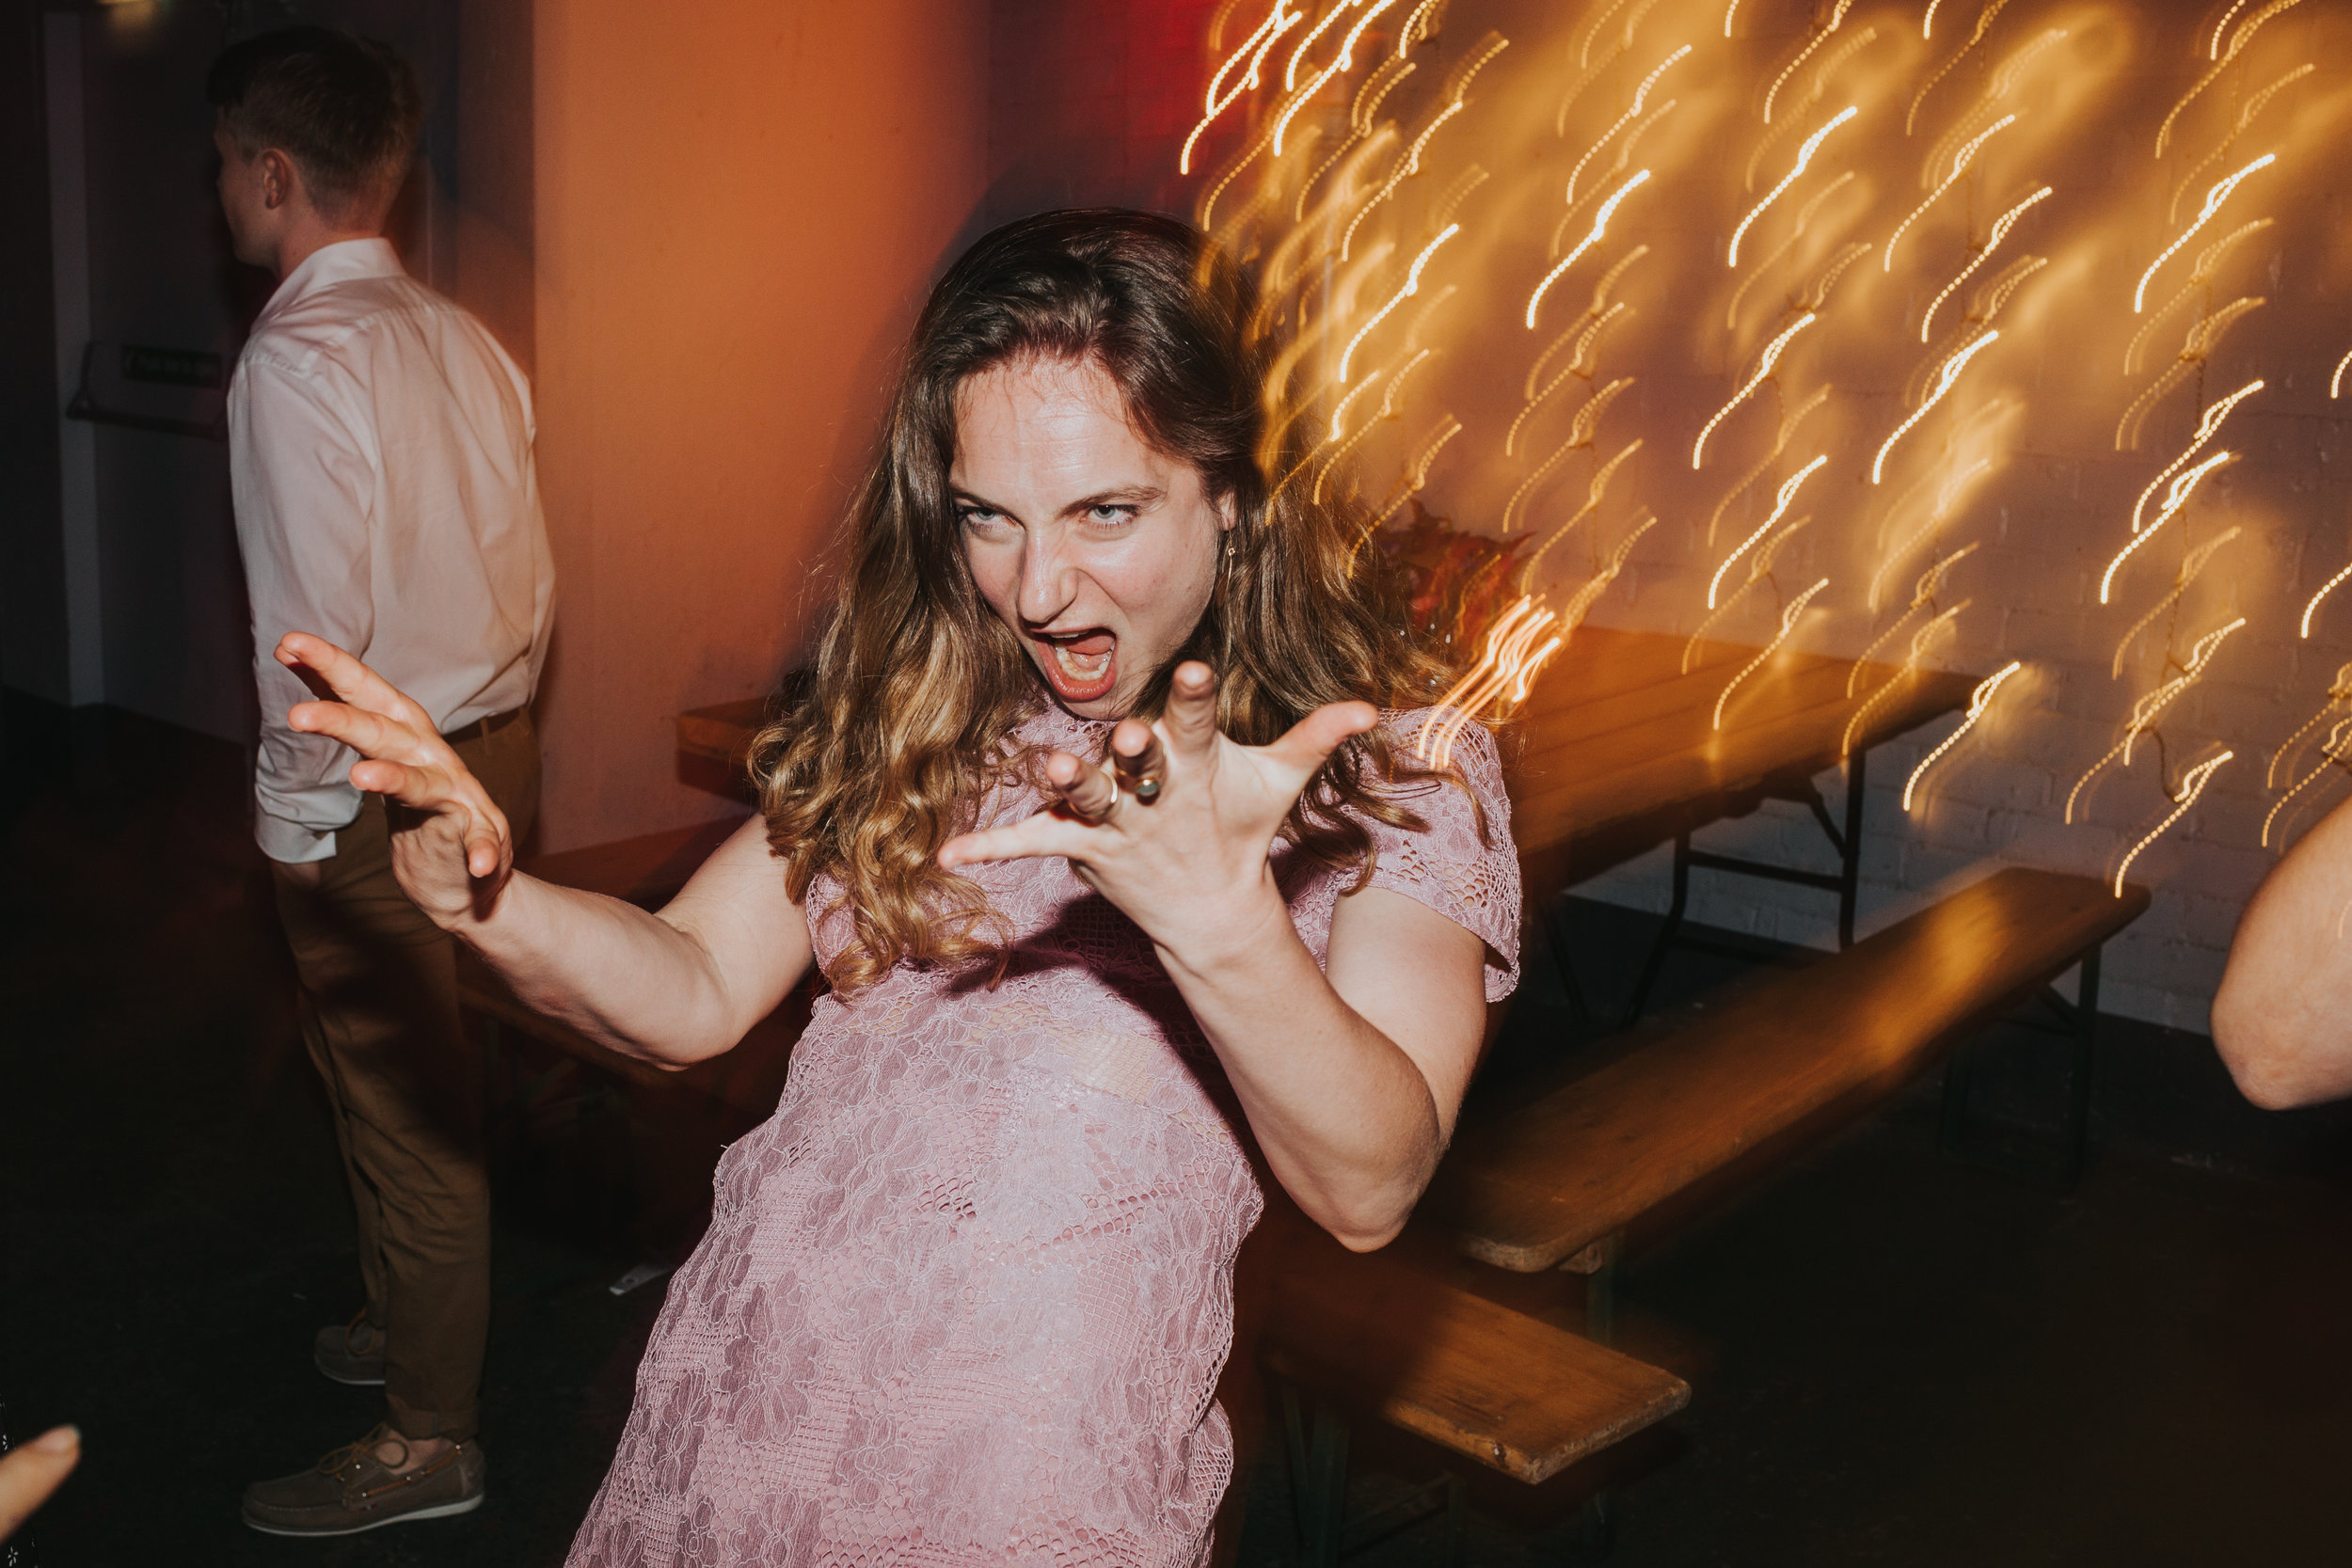 Wedding guest has a powerful witching hour moment on the dance floor.